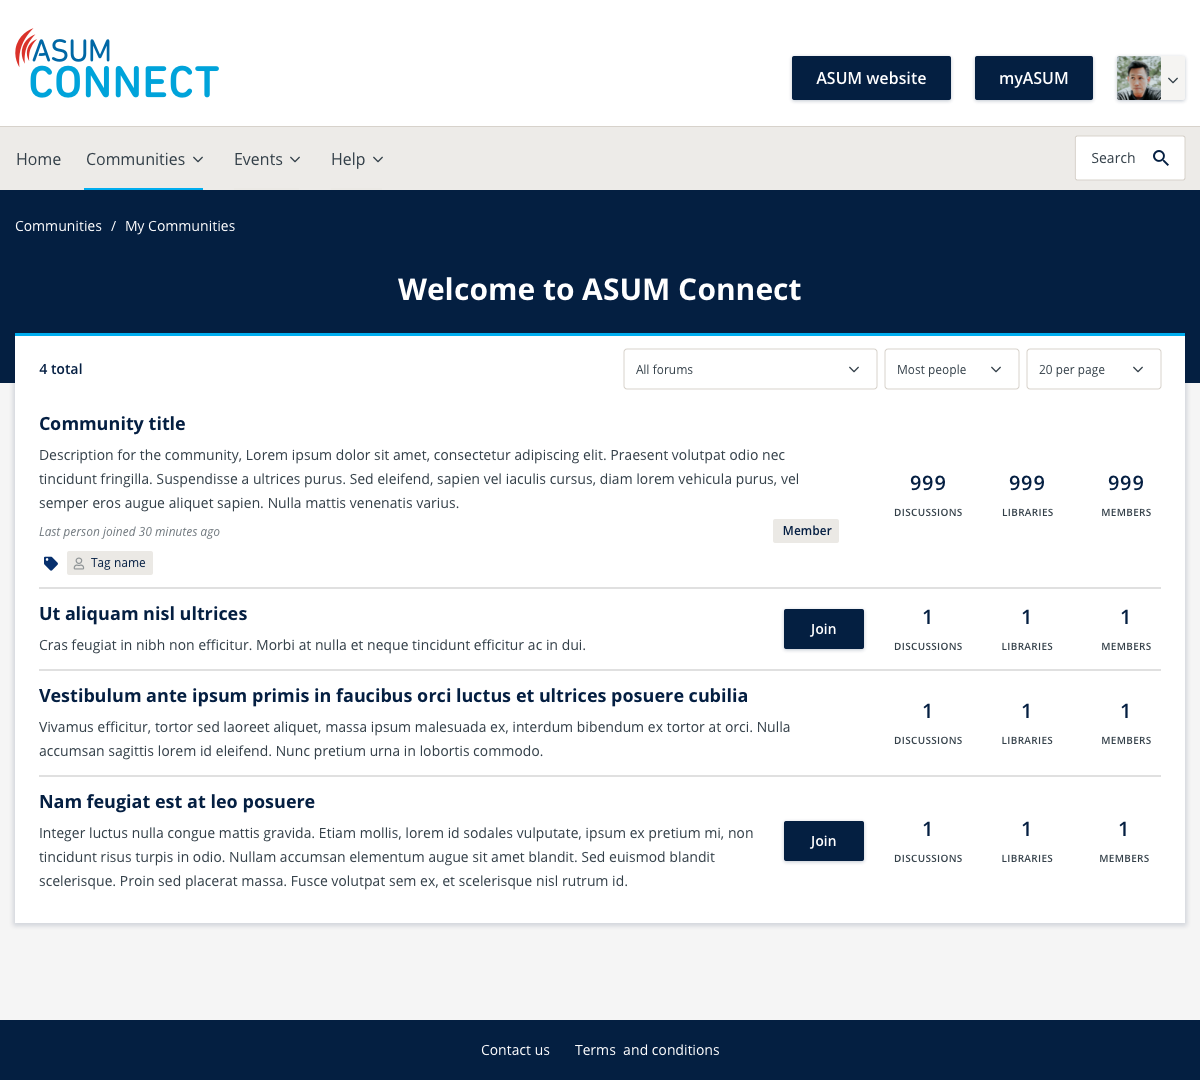 ASUM connect category landing page